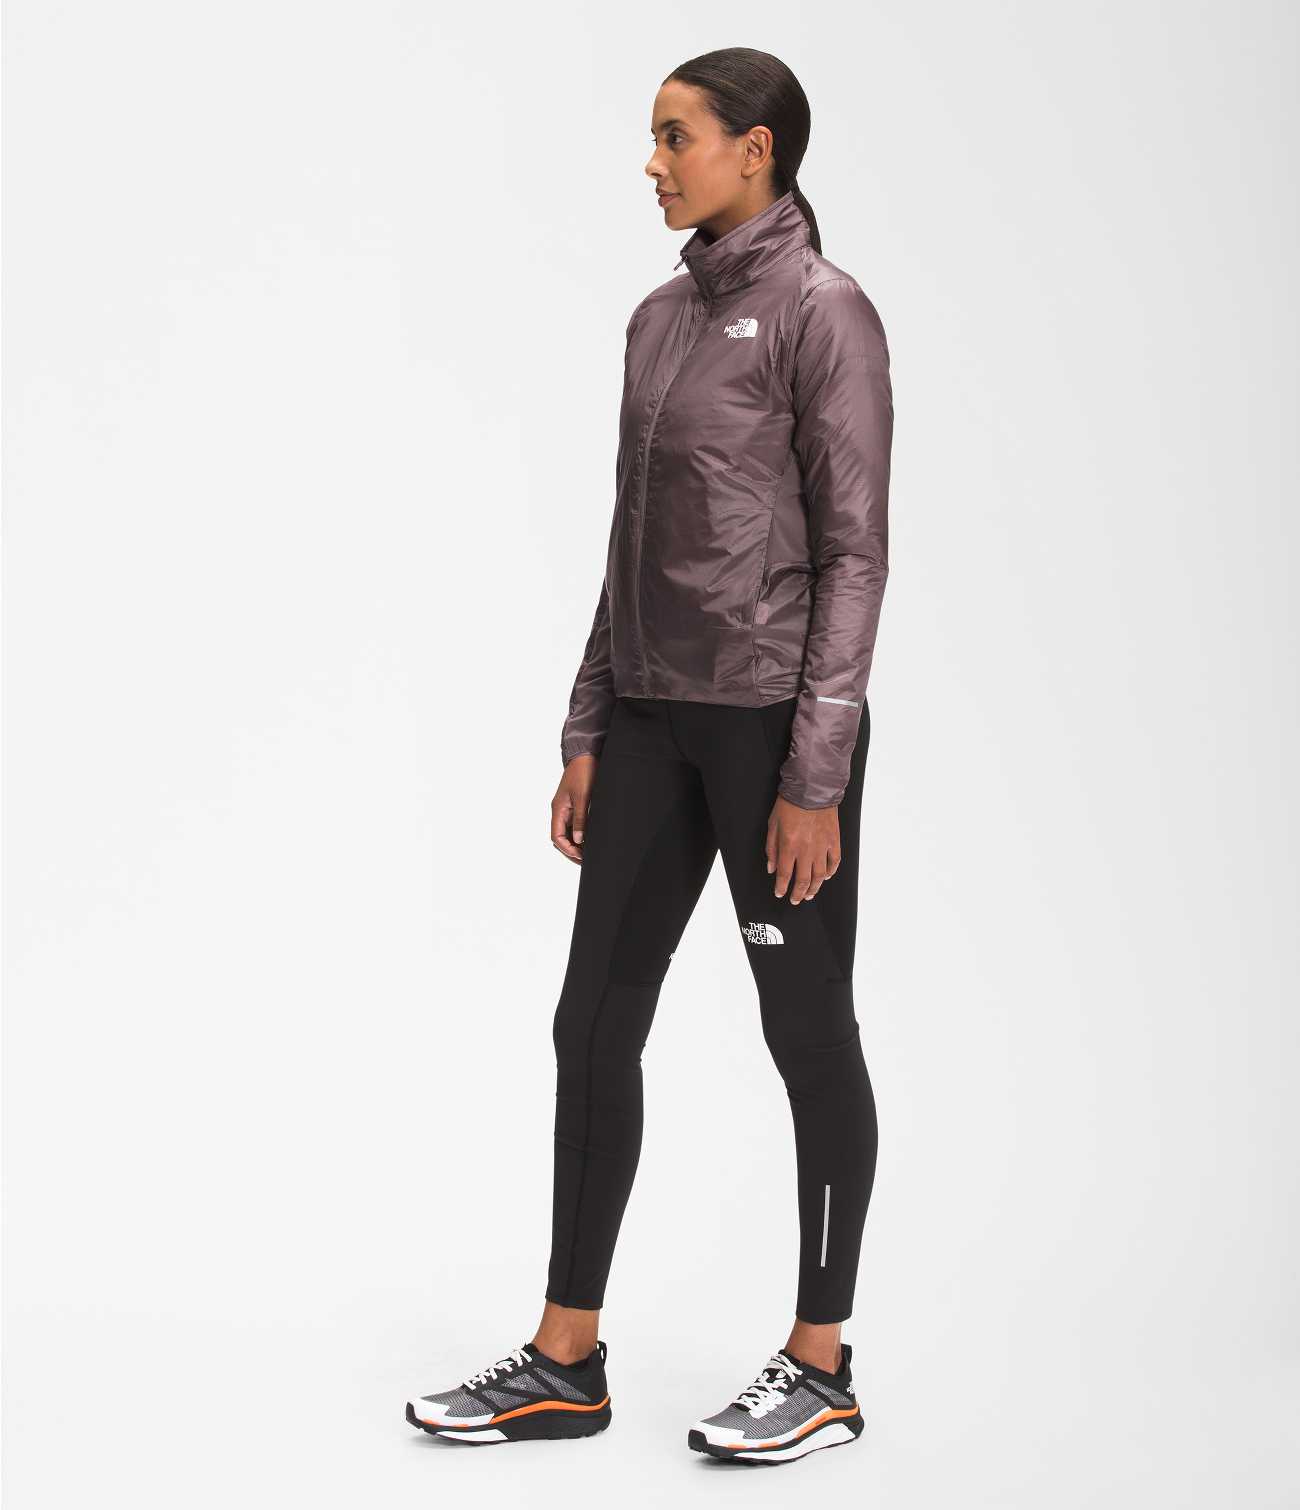 WOMEN'S WINTER WARM JACKET, The North Face